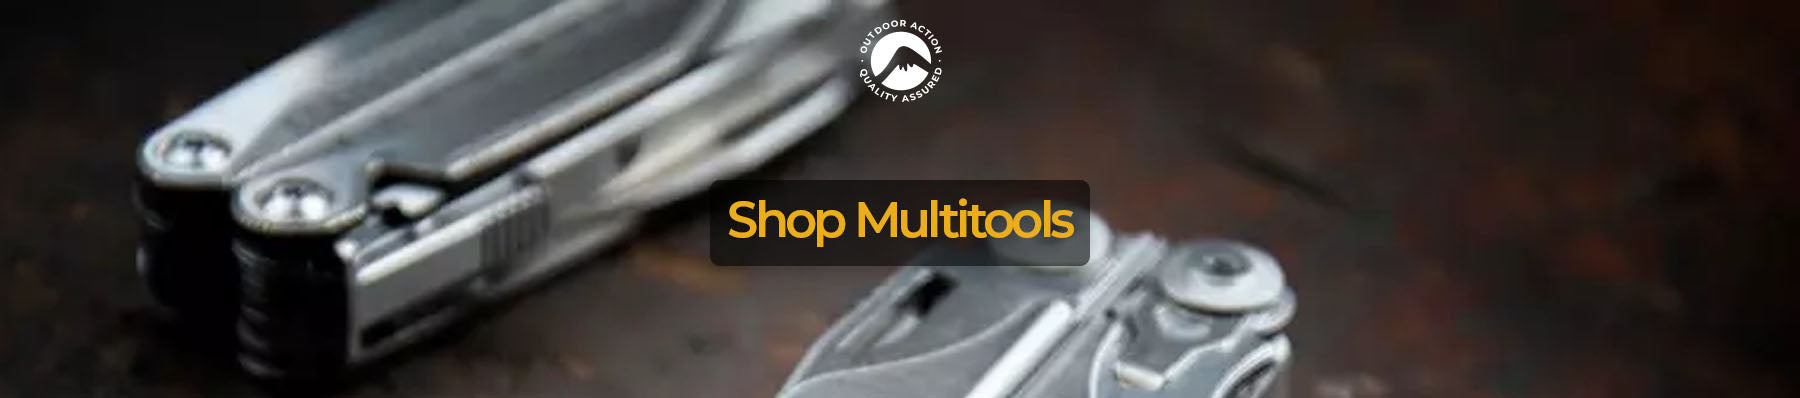 Shop Multitools online at Outdoor Action